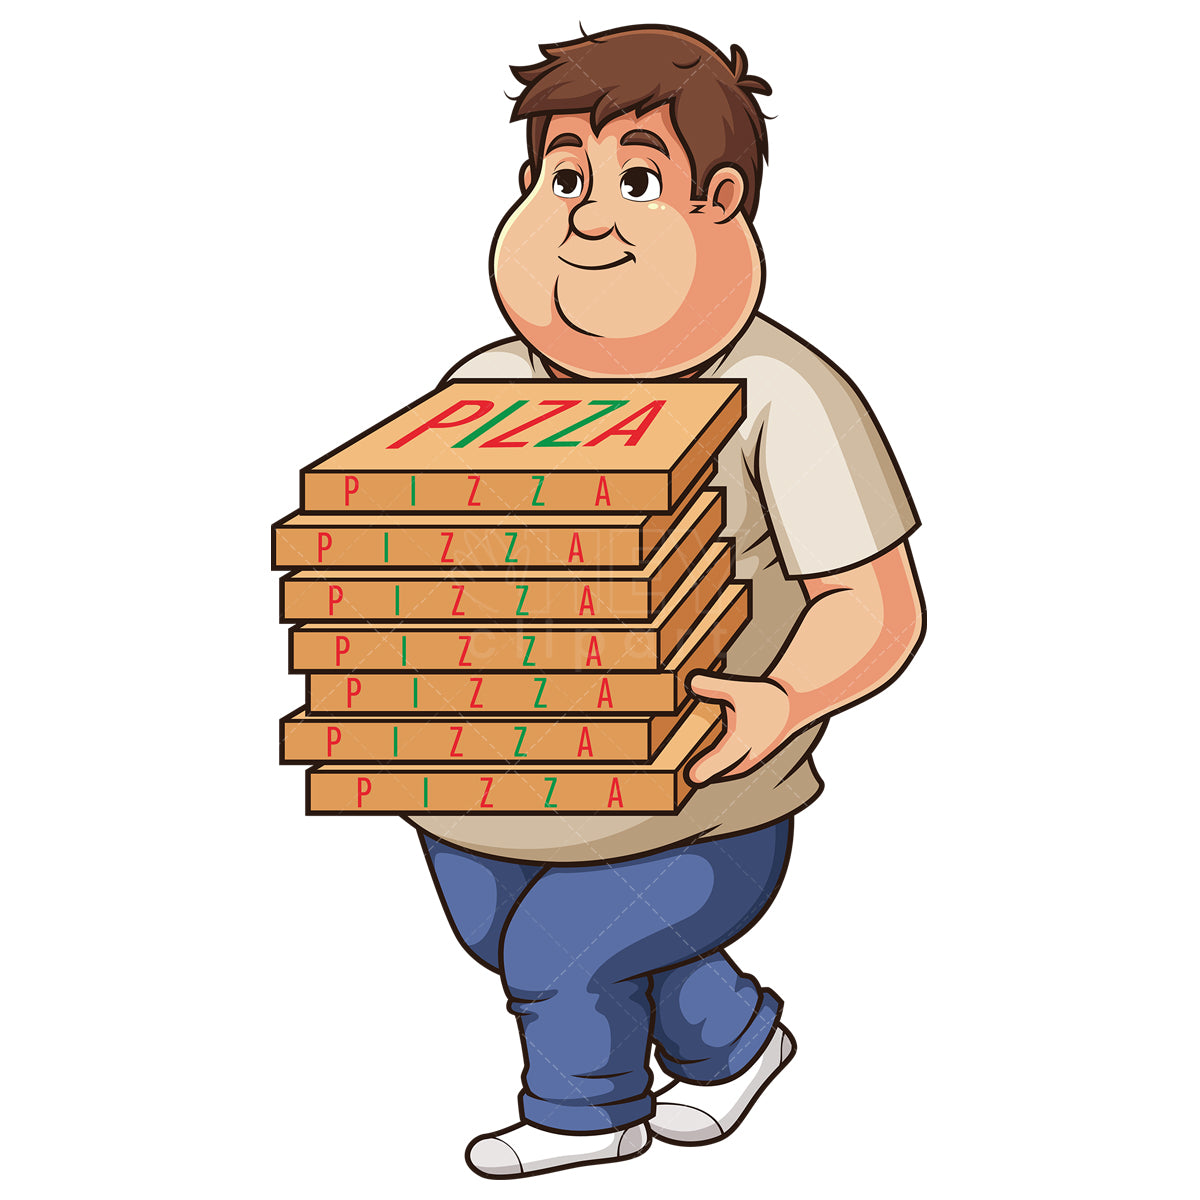 Royalty-free stock vector illustration of an overweight man carrying pizza boxes.